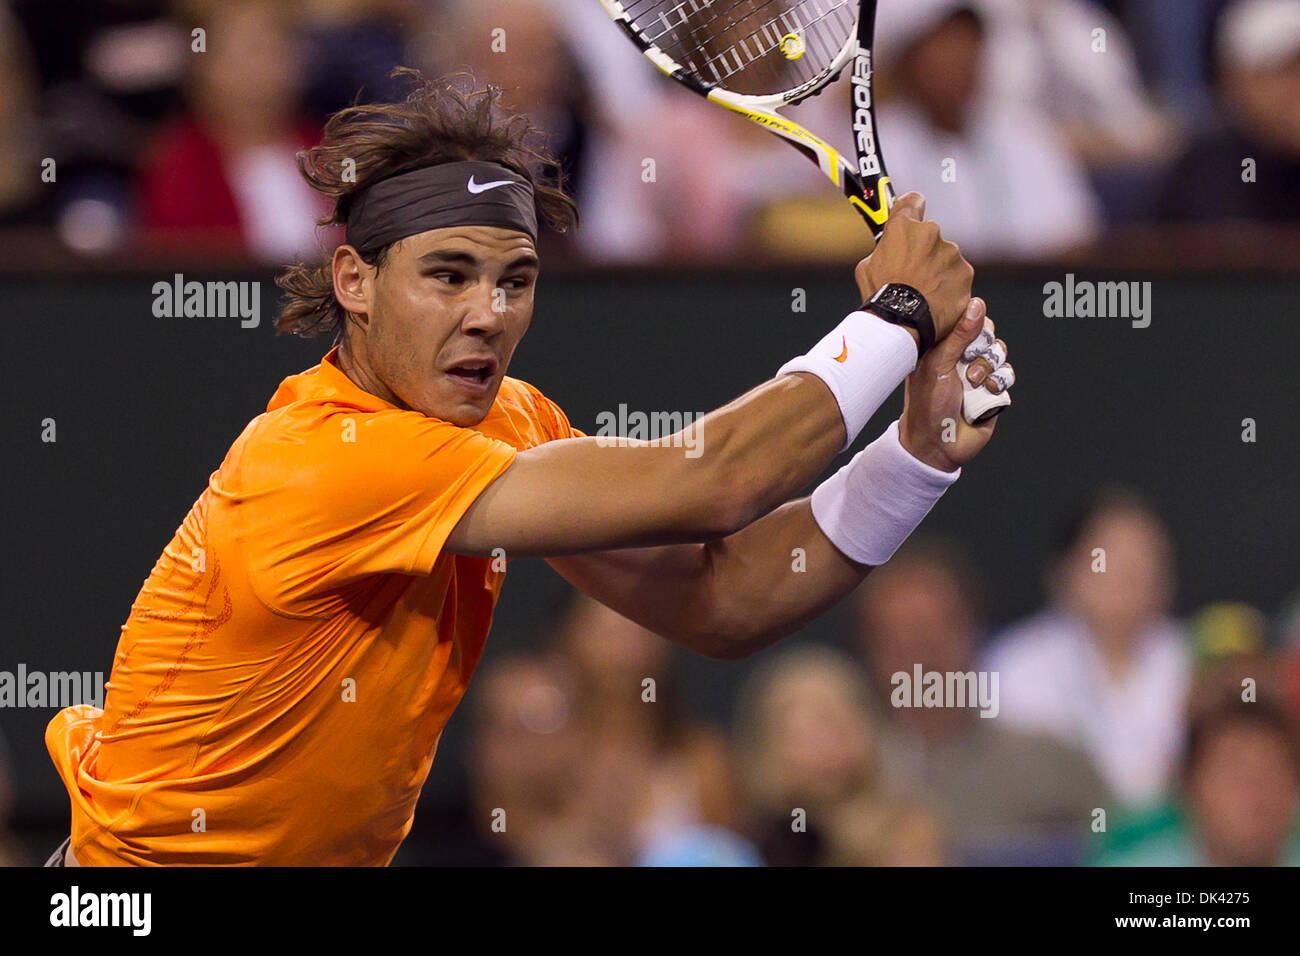 Mar. 17, 2011 - Indian Wells, California, U.S - [1] Rafael Nadal (ESP) in action during the men's quarterfinals match of the 2011 BNP Paribas Open held at the Indian Wells Tennis Garden in Indian Wells, California. Nadal won with a score of 5-7, 6-1, 7-6(7) (Credit Image: © Gerry Maceda/Southcreek Global/ZUMAPRESS.com) Stock Photo